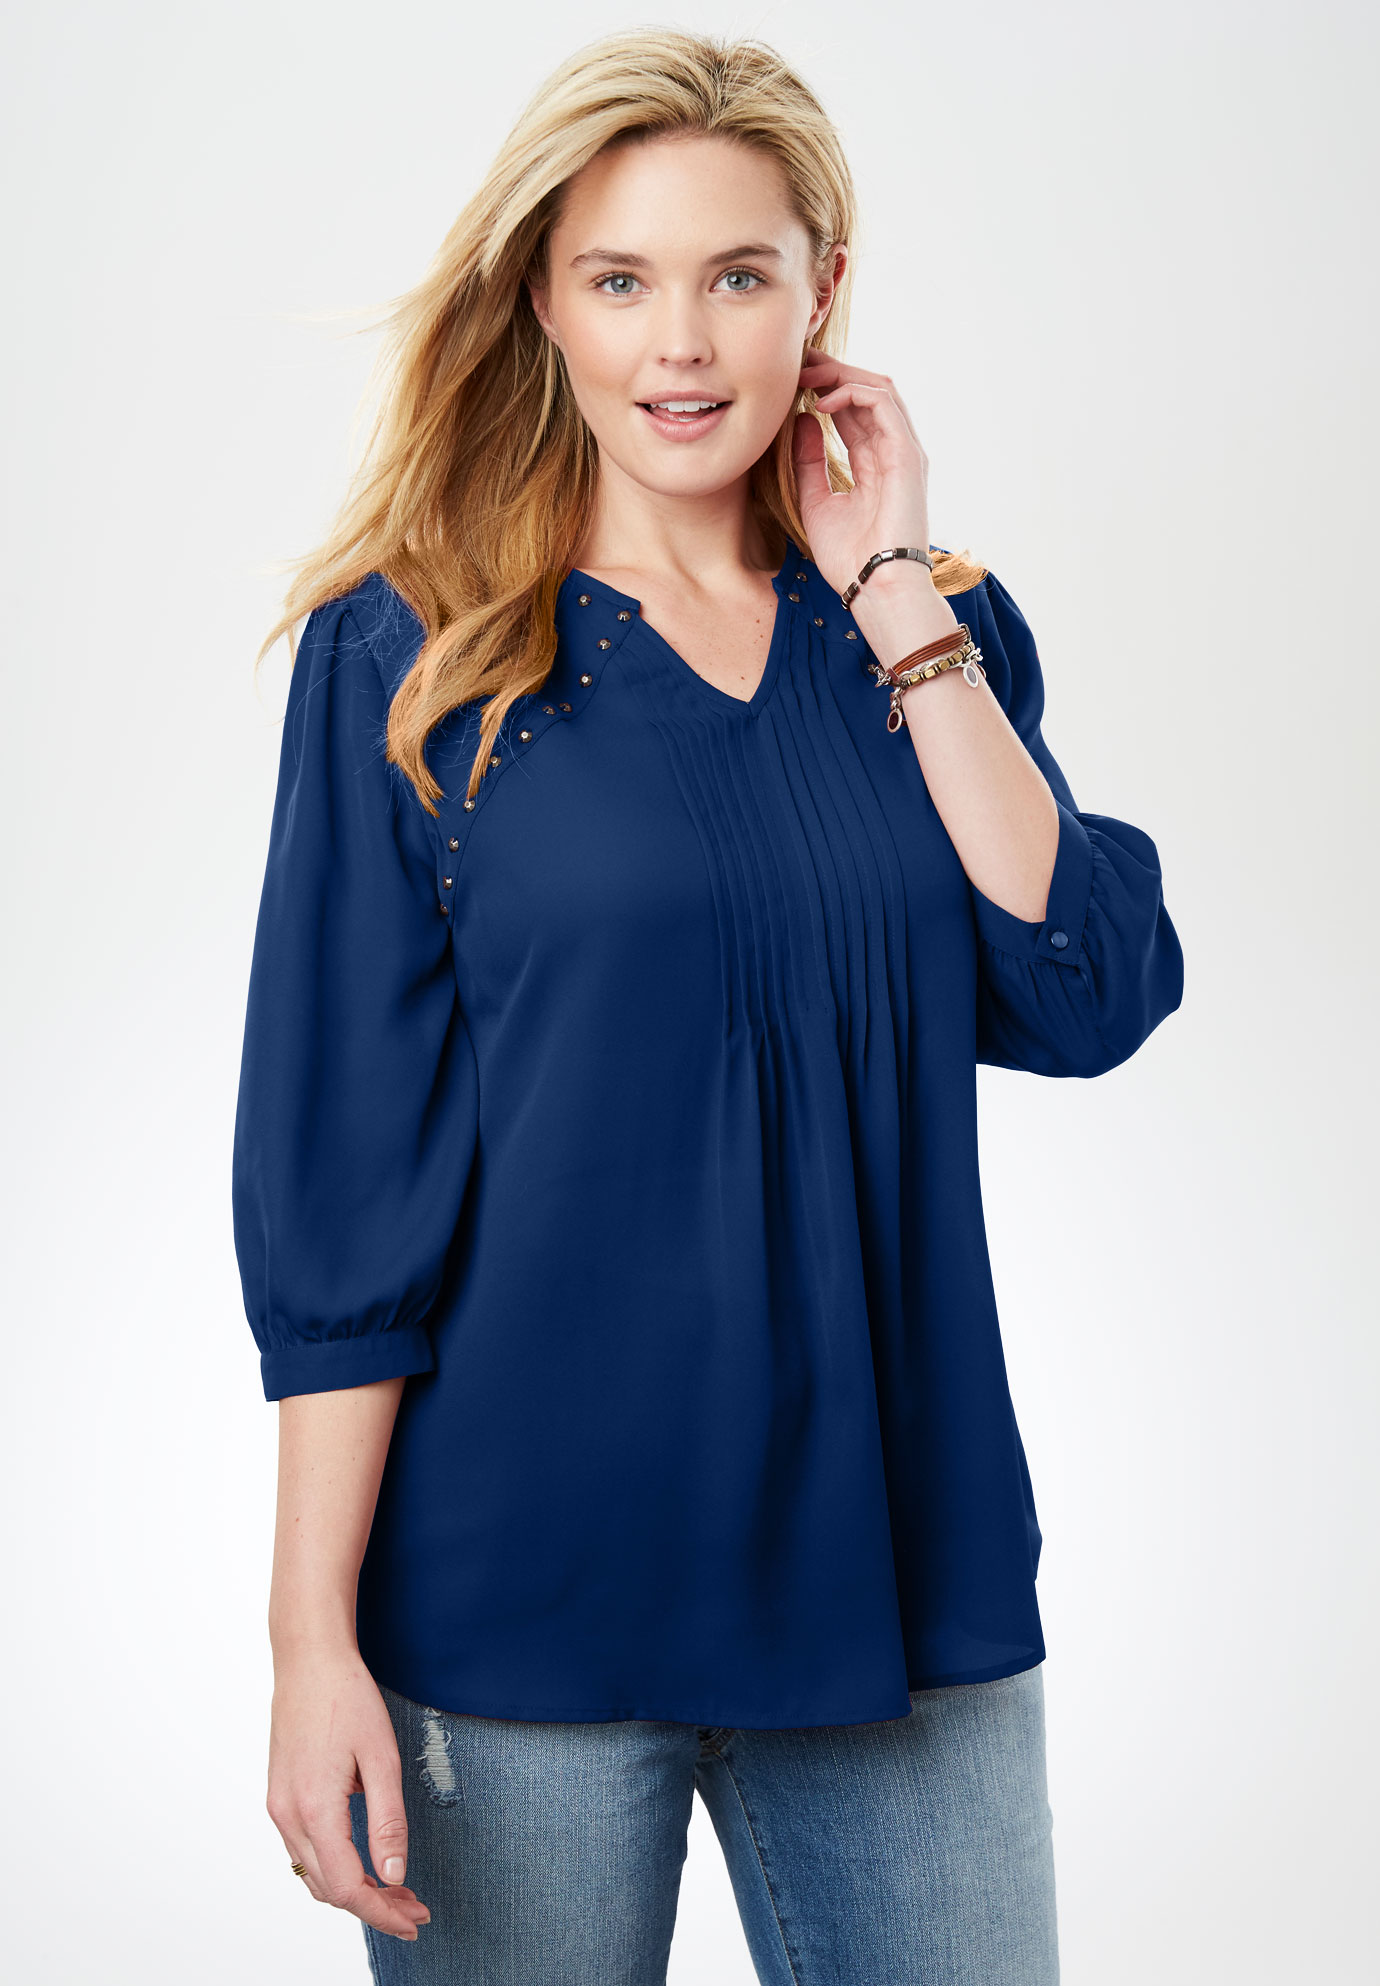 Studded Pintucked Blouse  Plus Size Shirts Blouses  